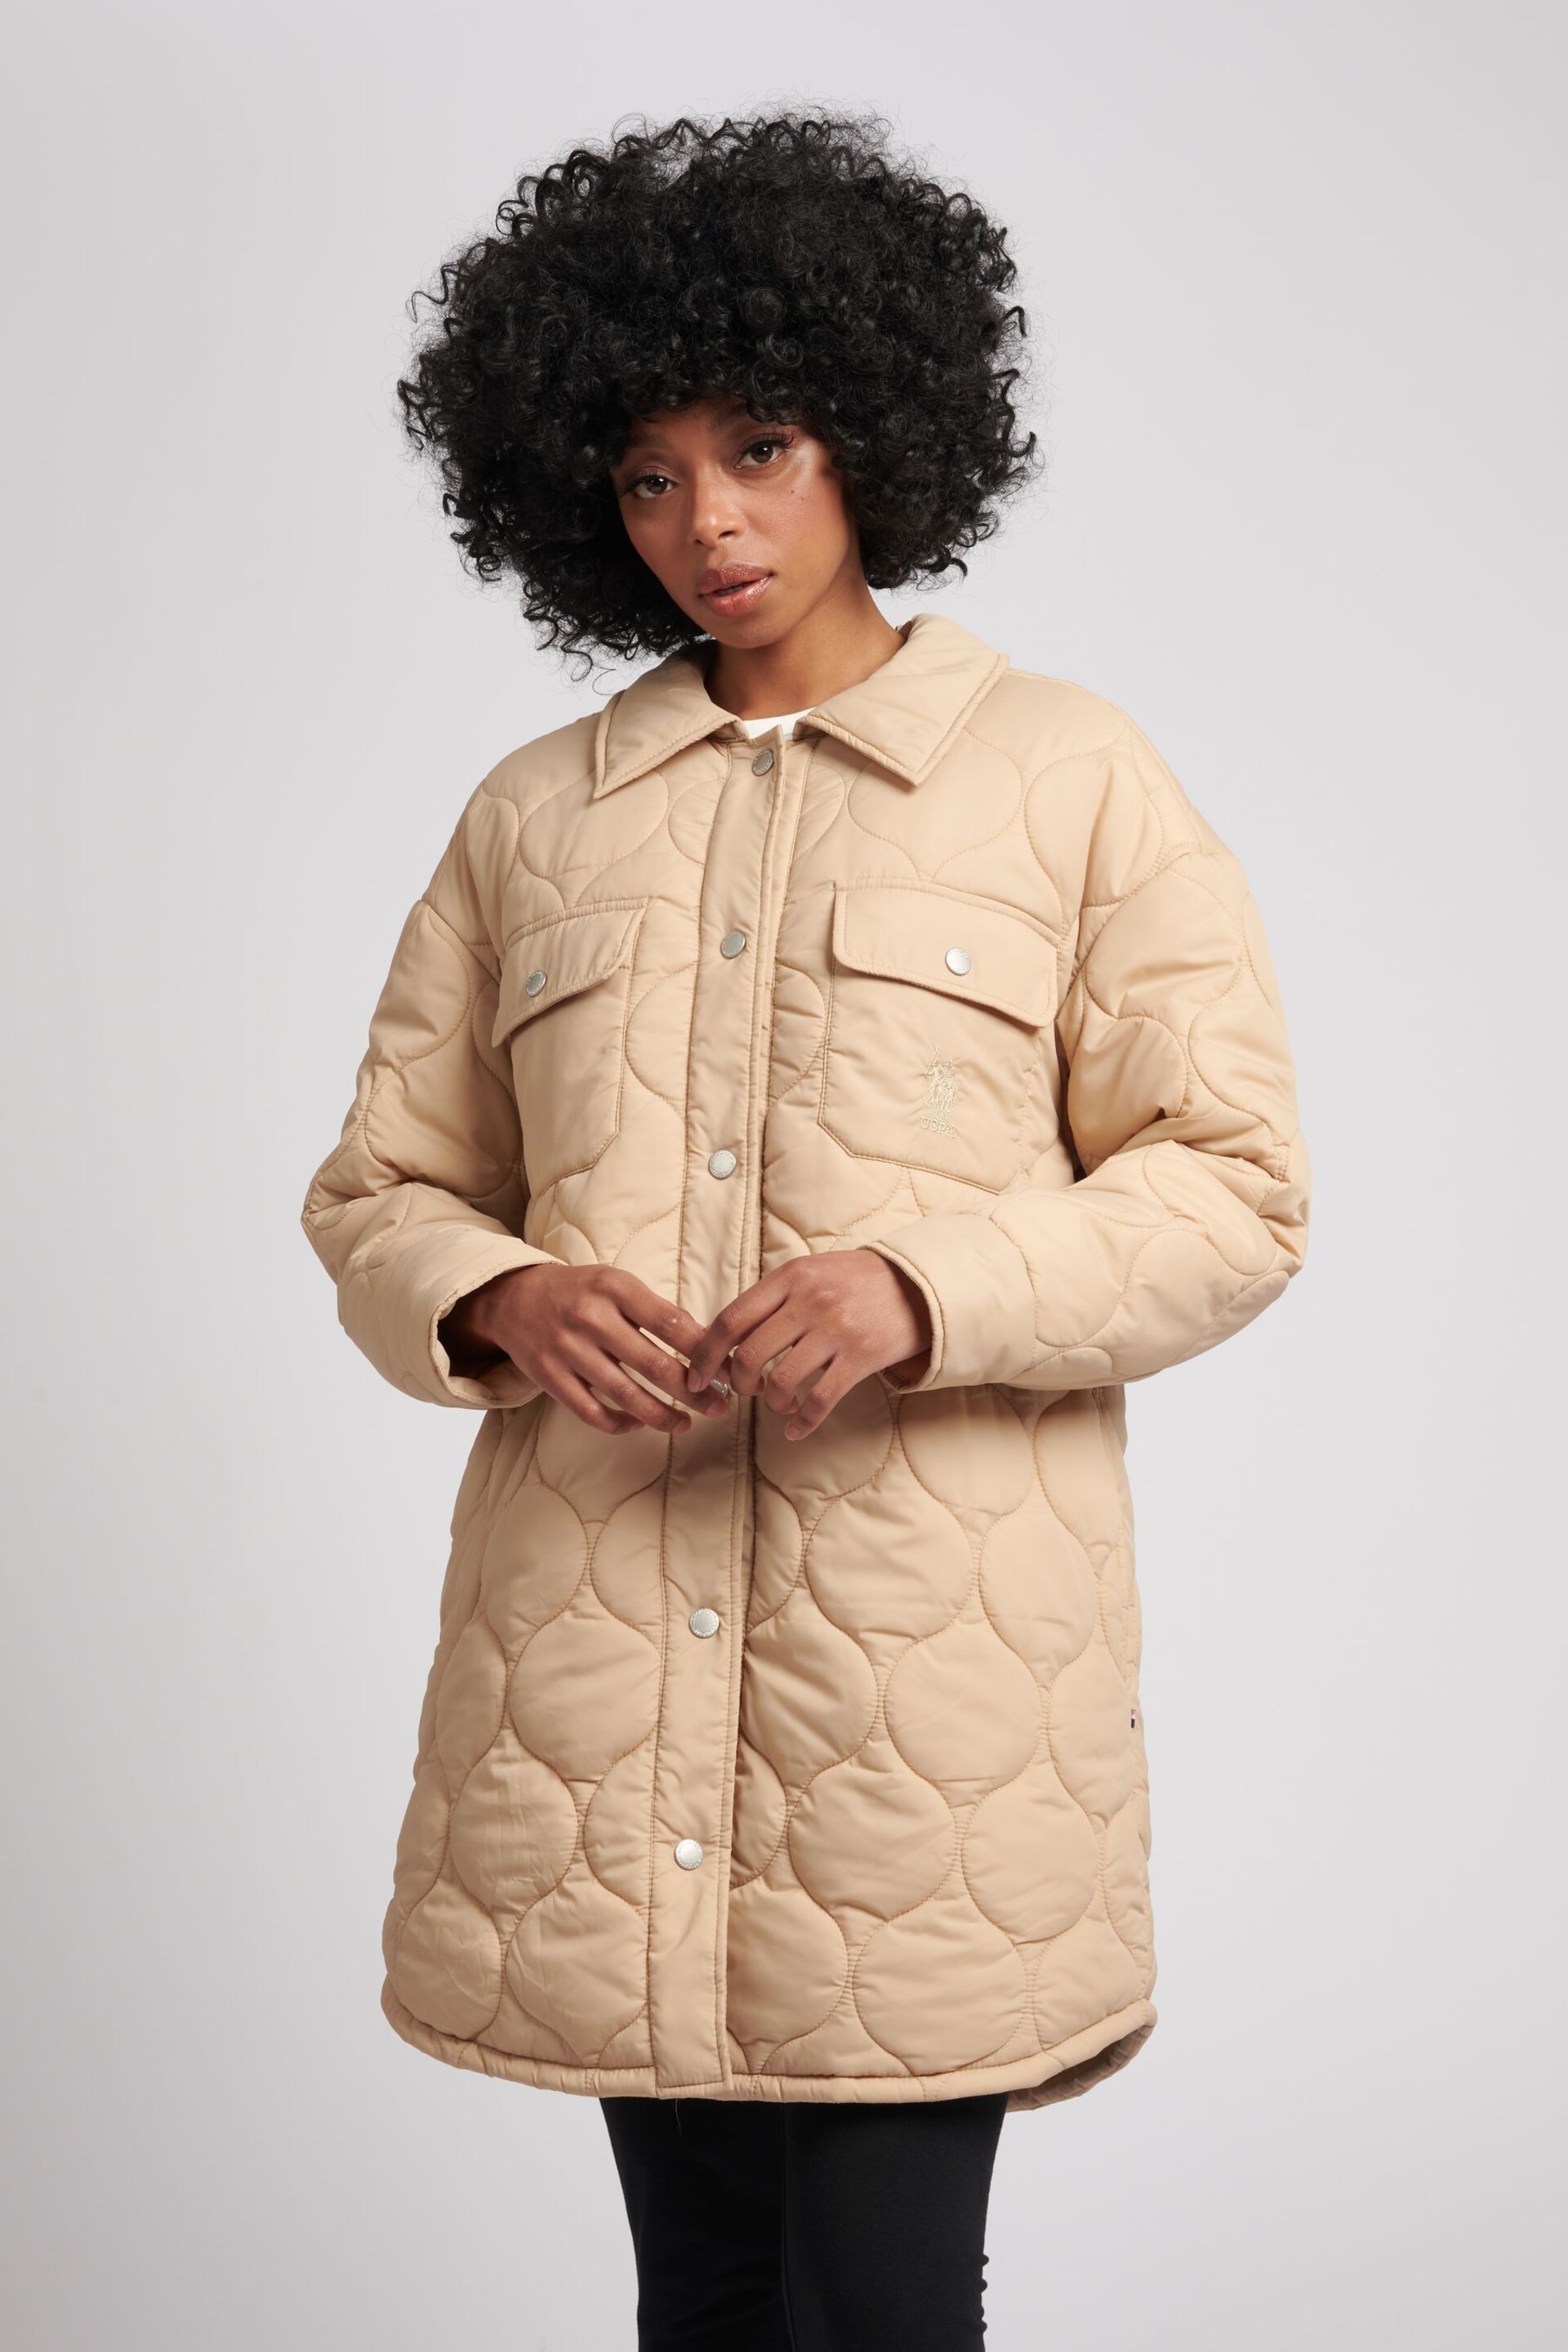 U.S. Polo Assn. Womens Quilted Overshirt - Image 1 of 4